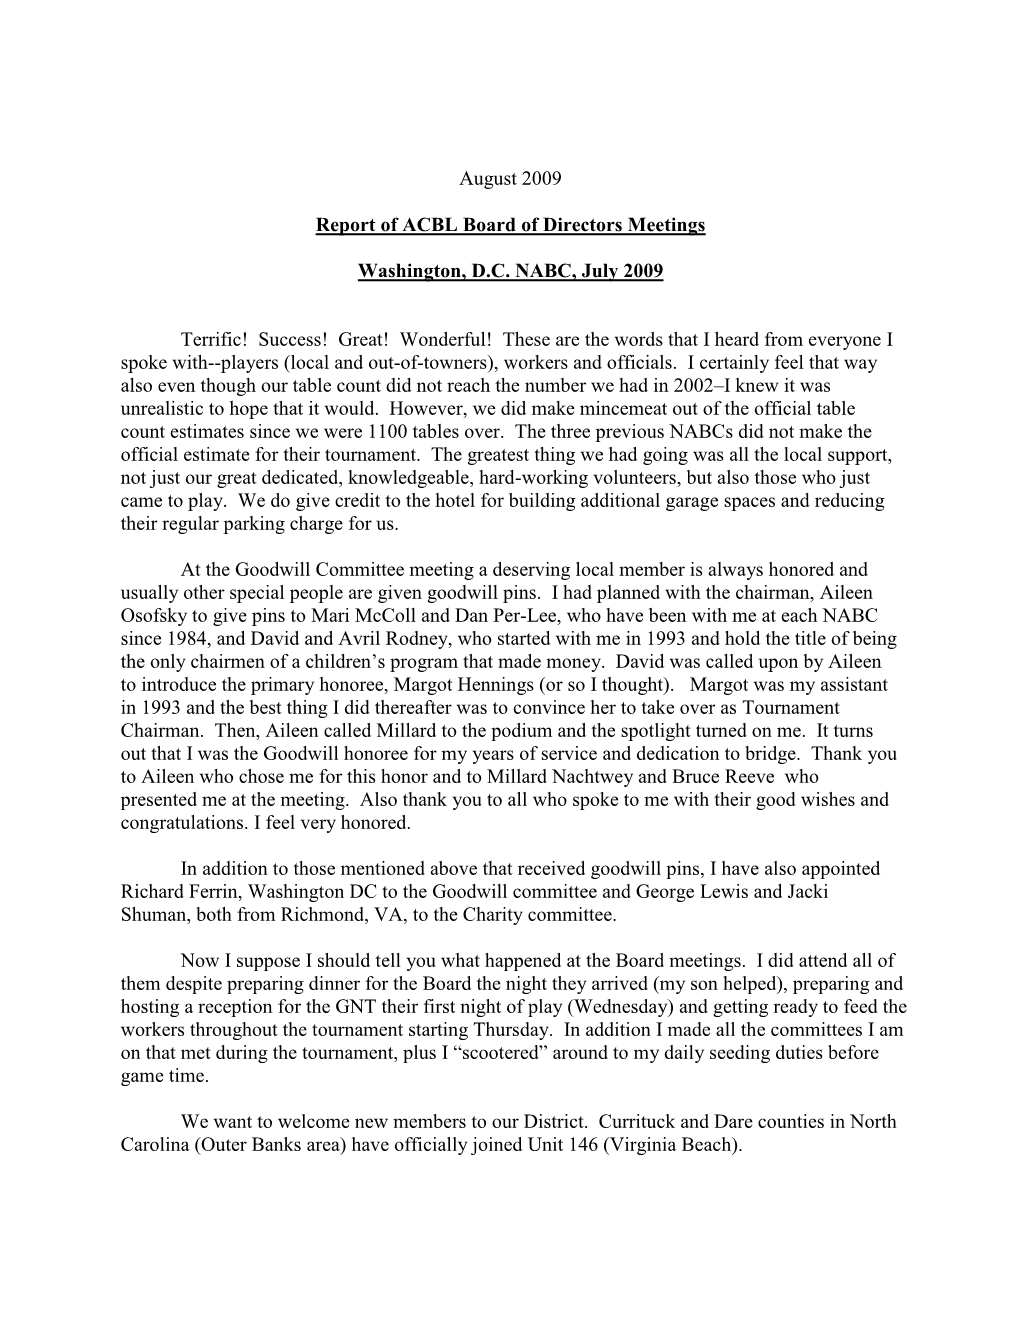 August 2009 Report of ACBL Board of Directors